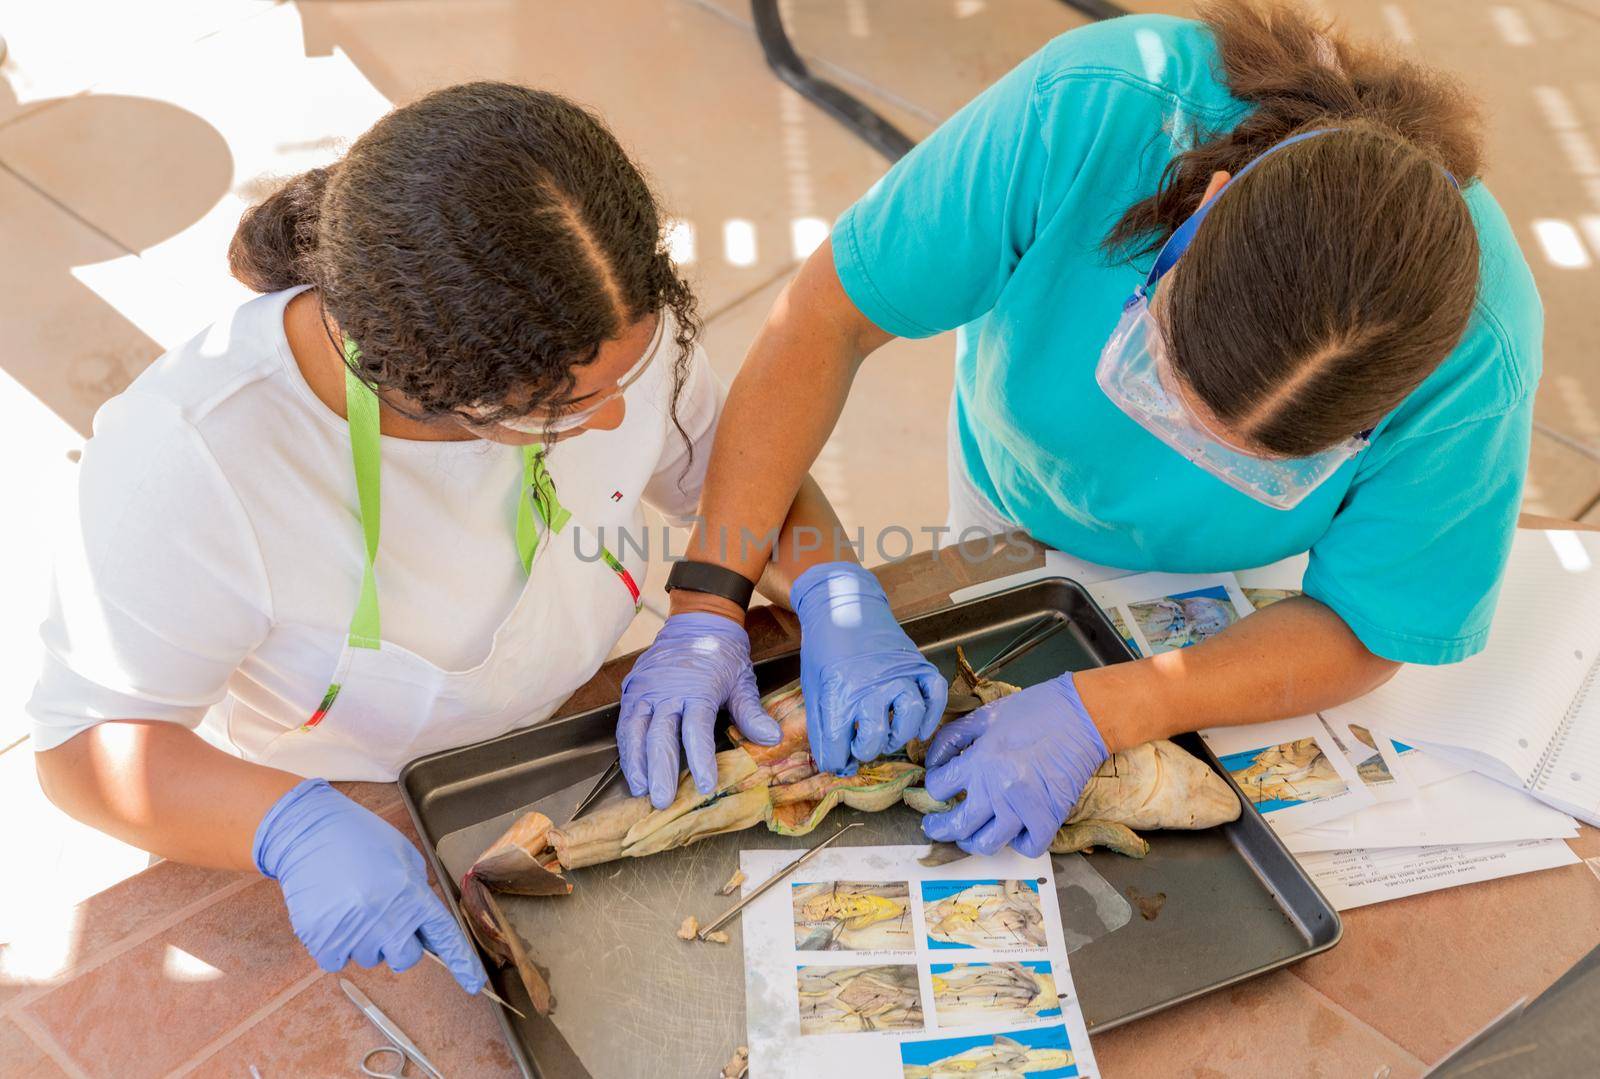 Overhead View of Shark Dissection and Instructions by sandrafoyt